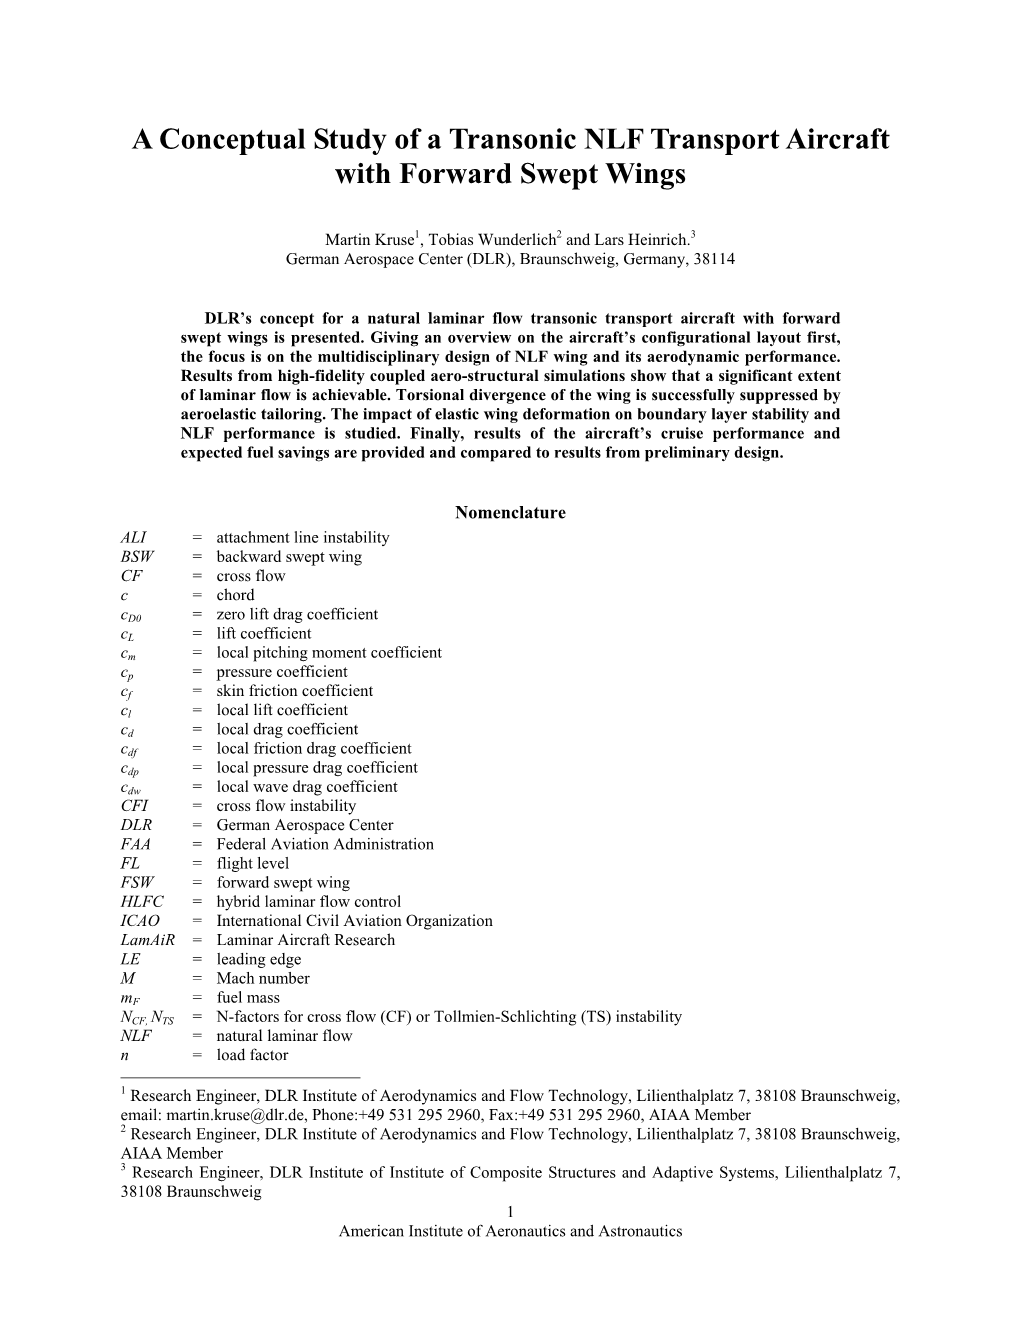 A Conceptual Study of a Transonic NLF Transport Aircraft with Forward Swept Wings